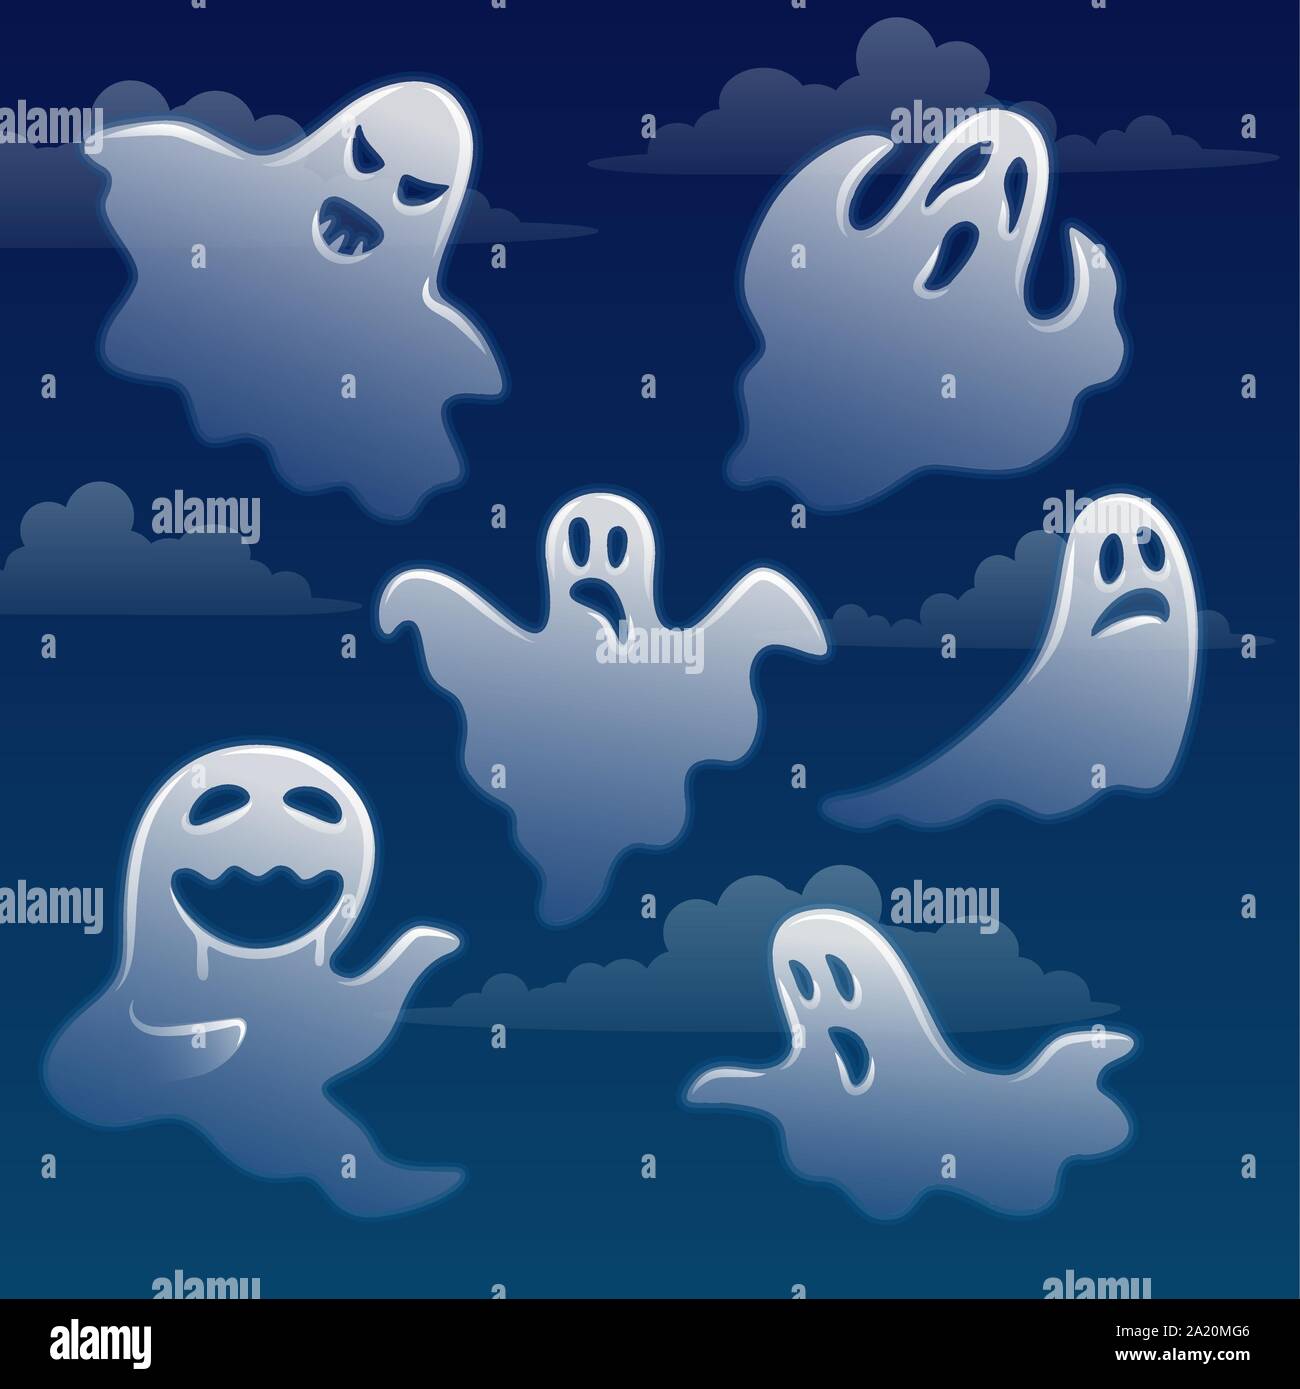 Set of ghosts with different emotions on sky with clouds Stock Vector